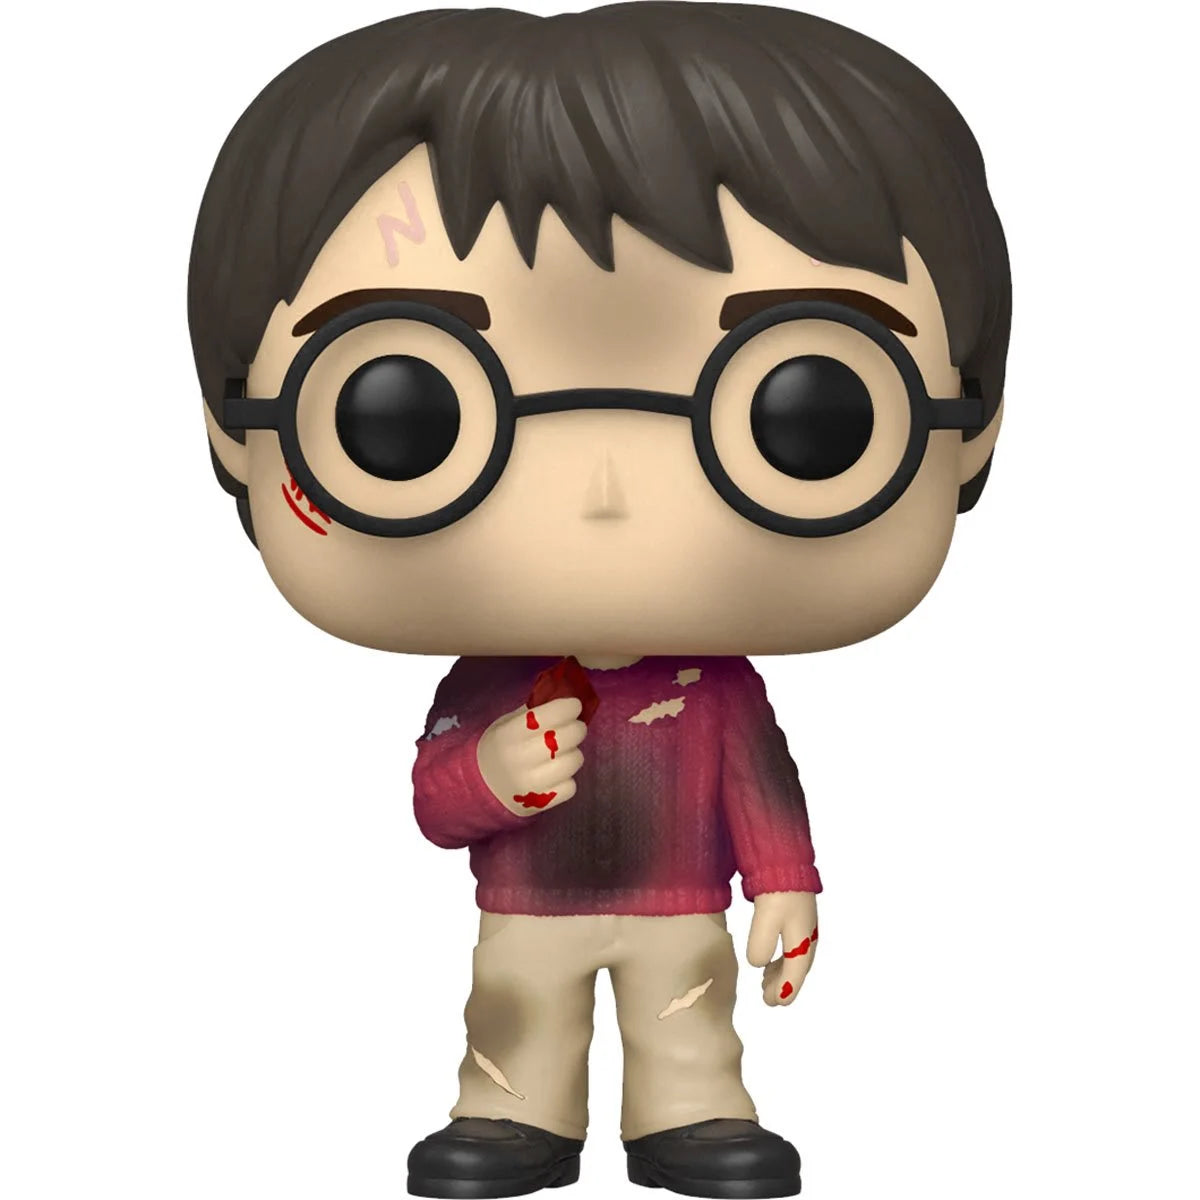 Harry Potter and the Sorcerer's Stone 20th Anniversary Harry with the Stone Pop! Vinyl Figure - D-Pop